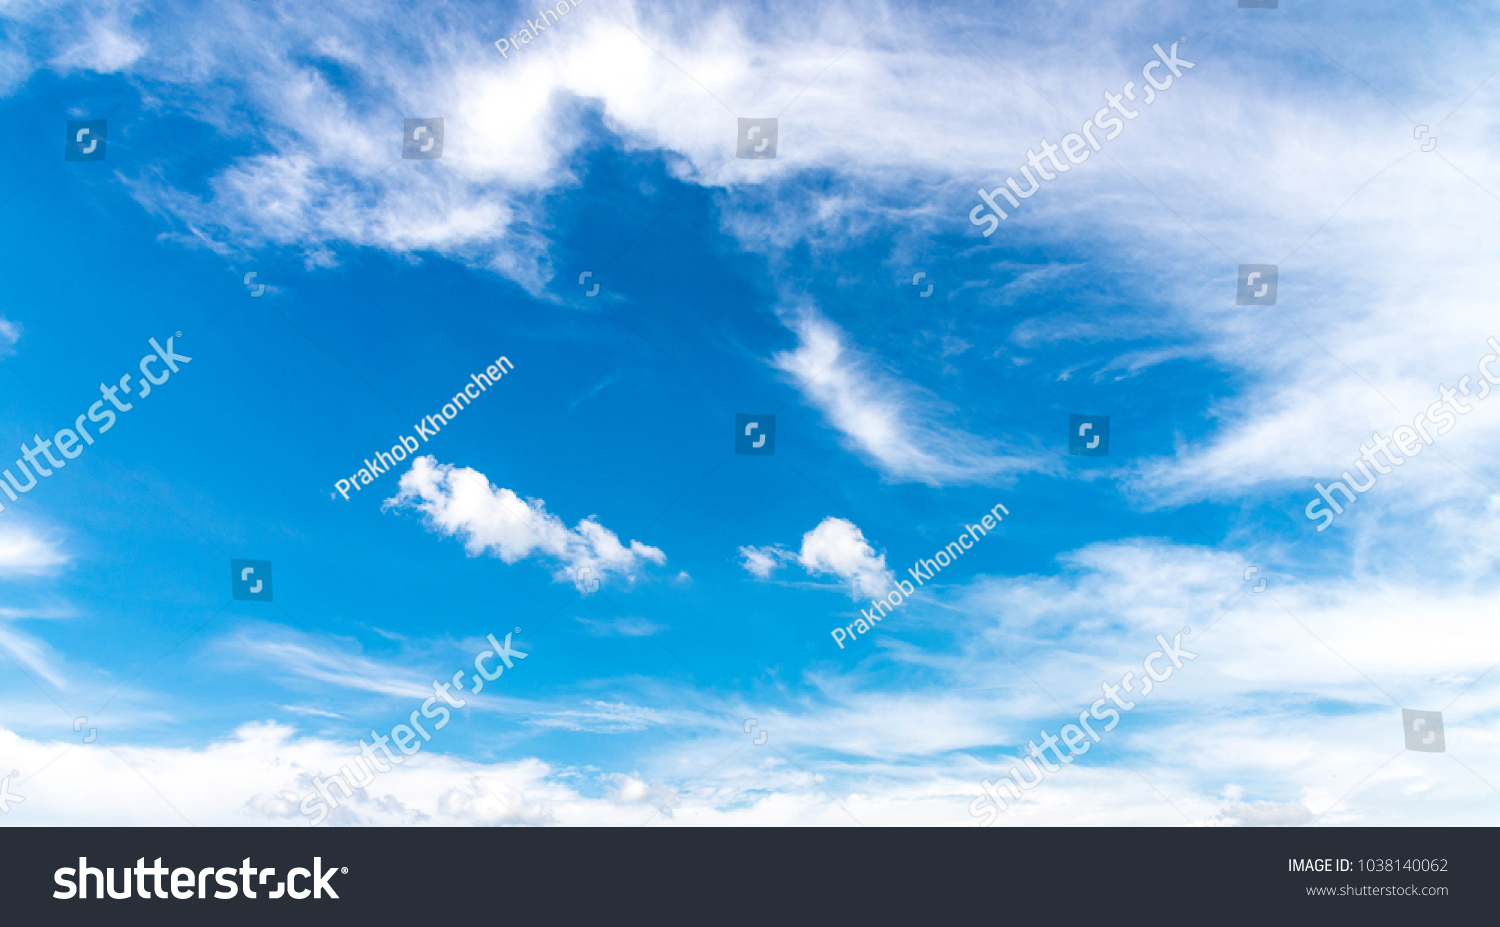 Blue sky with white clouds,Summer concept or Natural concept, Blue sky moving with white clouds. #1038140062